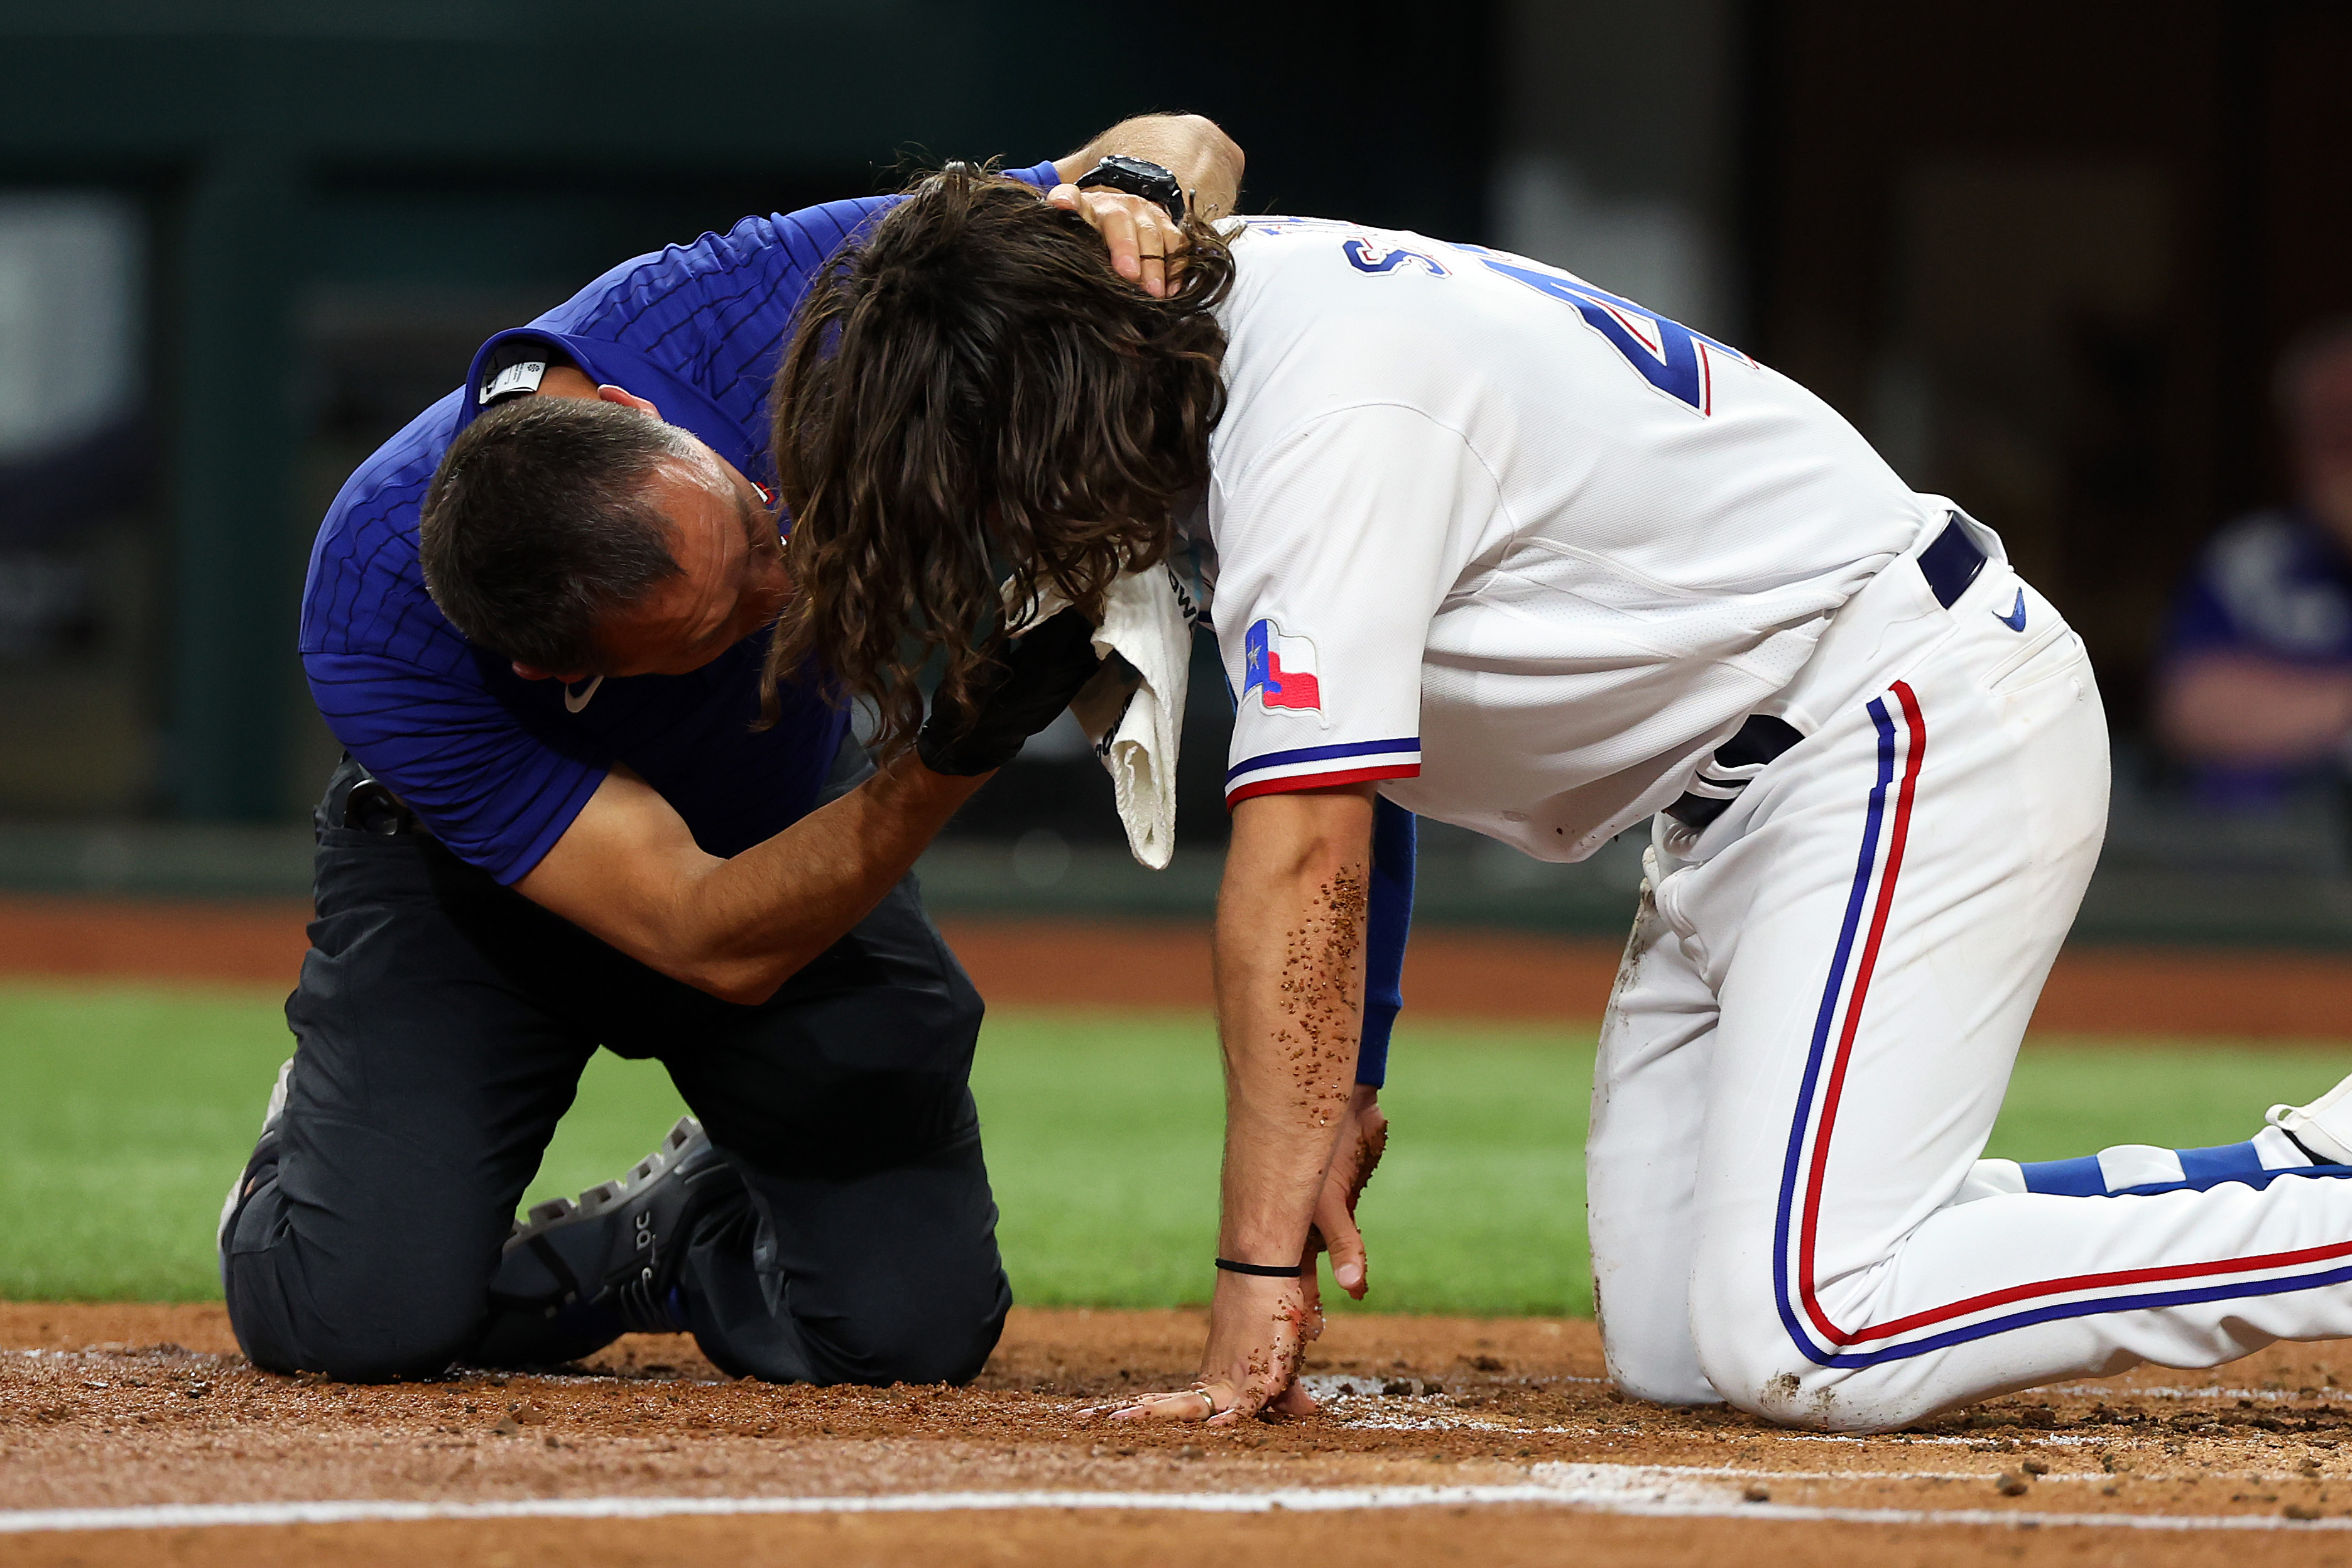 Rangers' Josh Smith hit in jaw with 88 mph pitch, taken to hospital